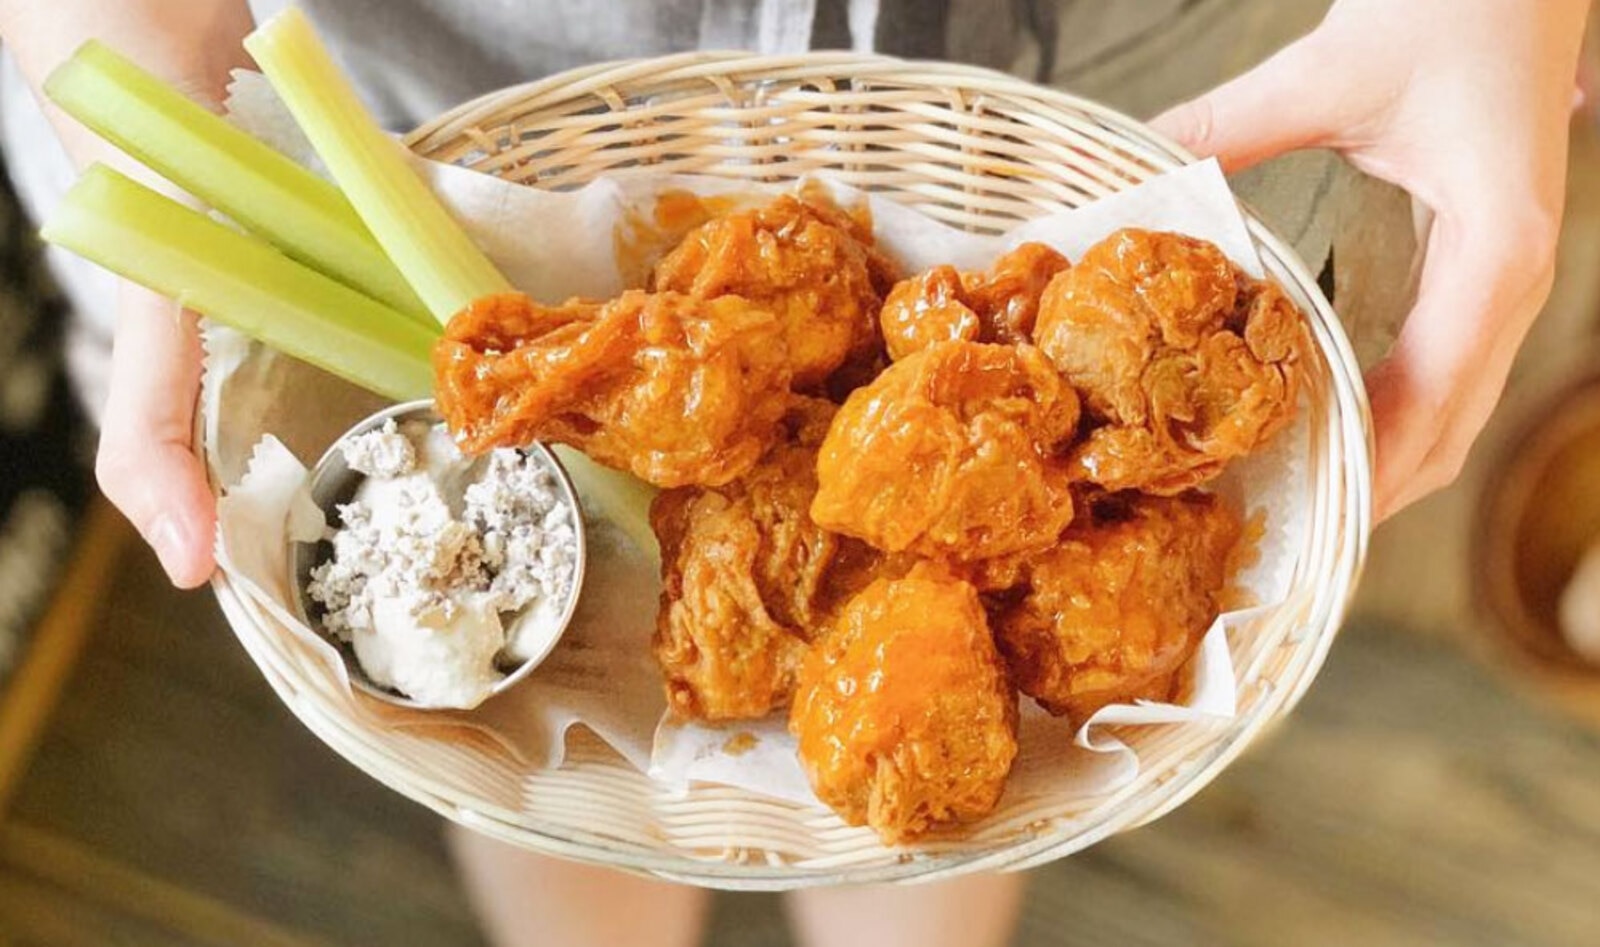 Americans Will Eat 160 Million Vegan Chicken Wings During Super Bowl, New Report Estimates